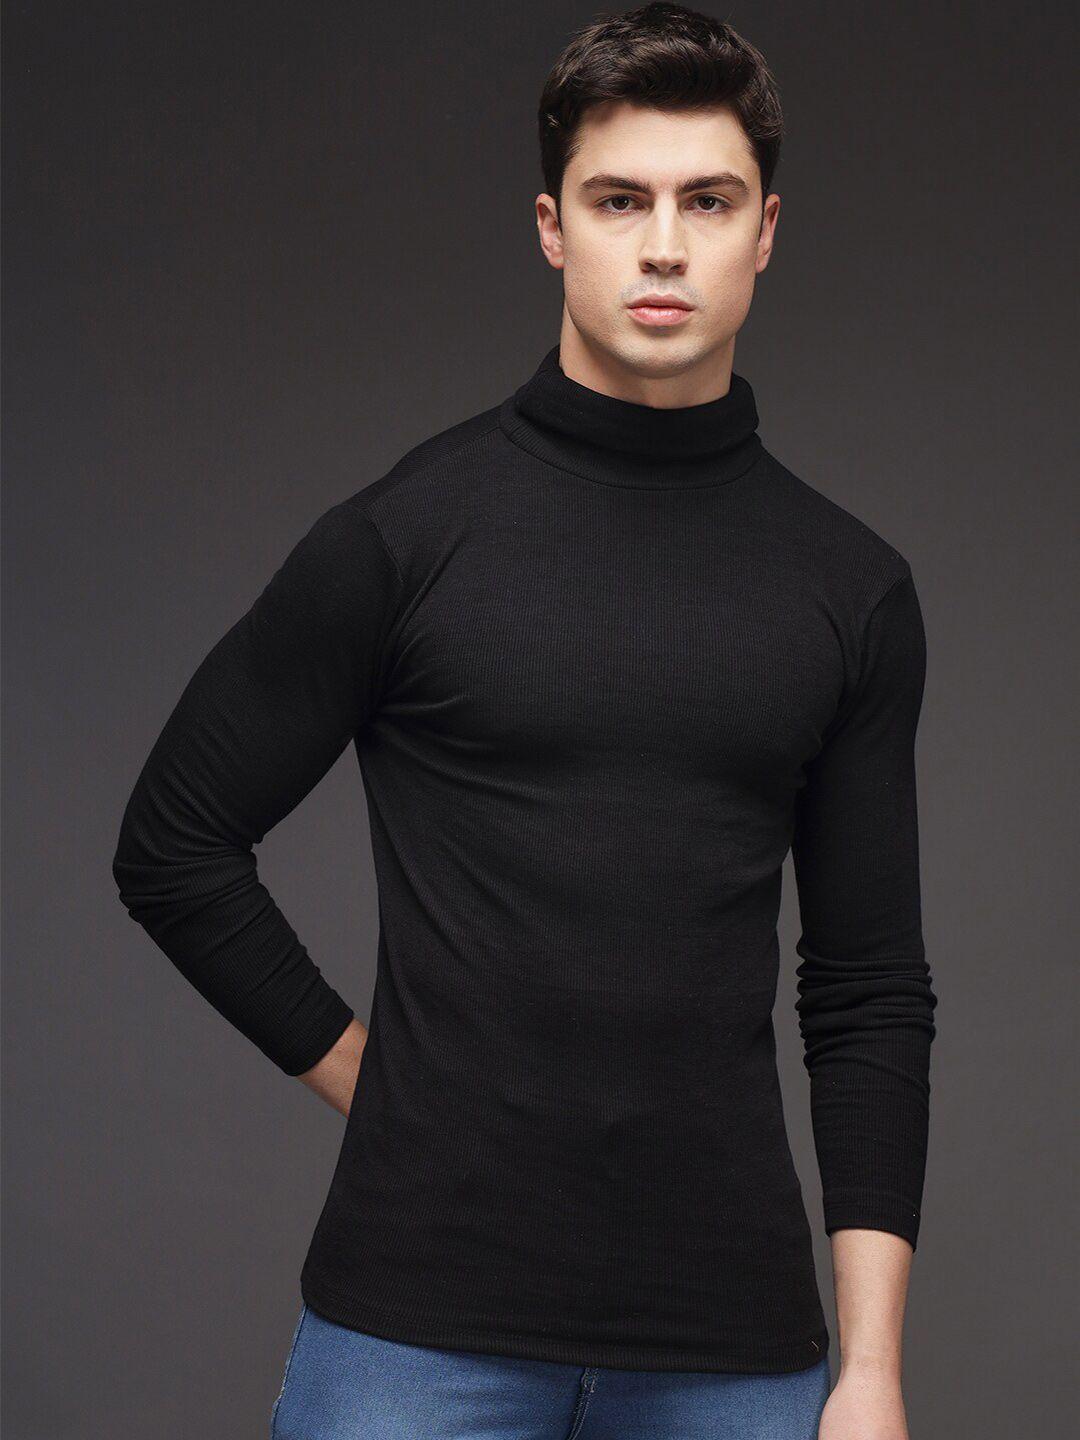 baesd long sleeves turtle neck ribbed cotton pullover sweater